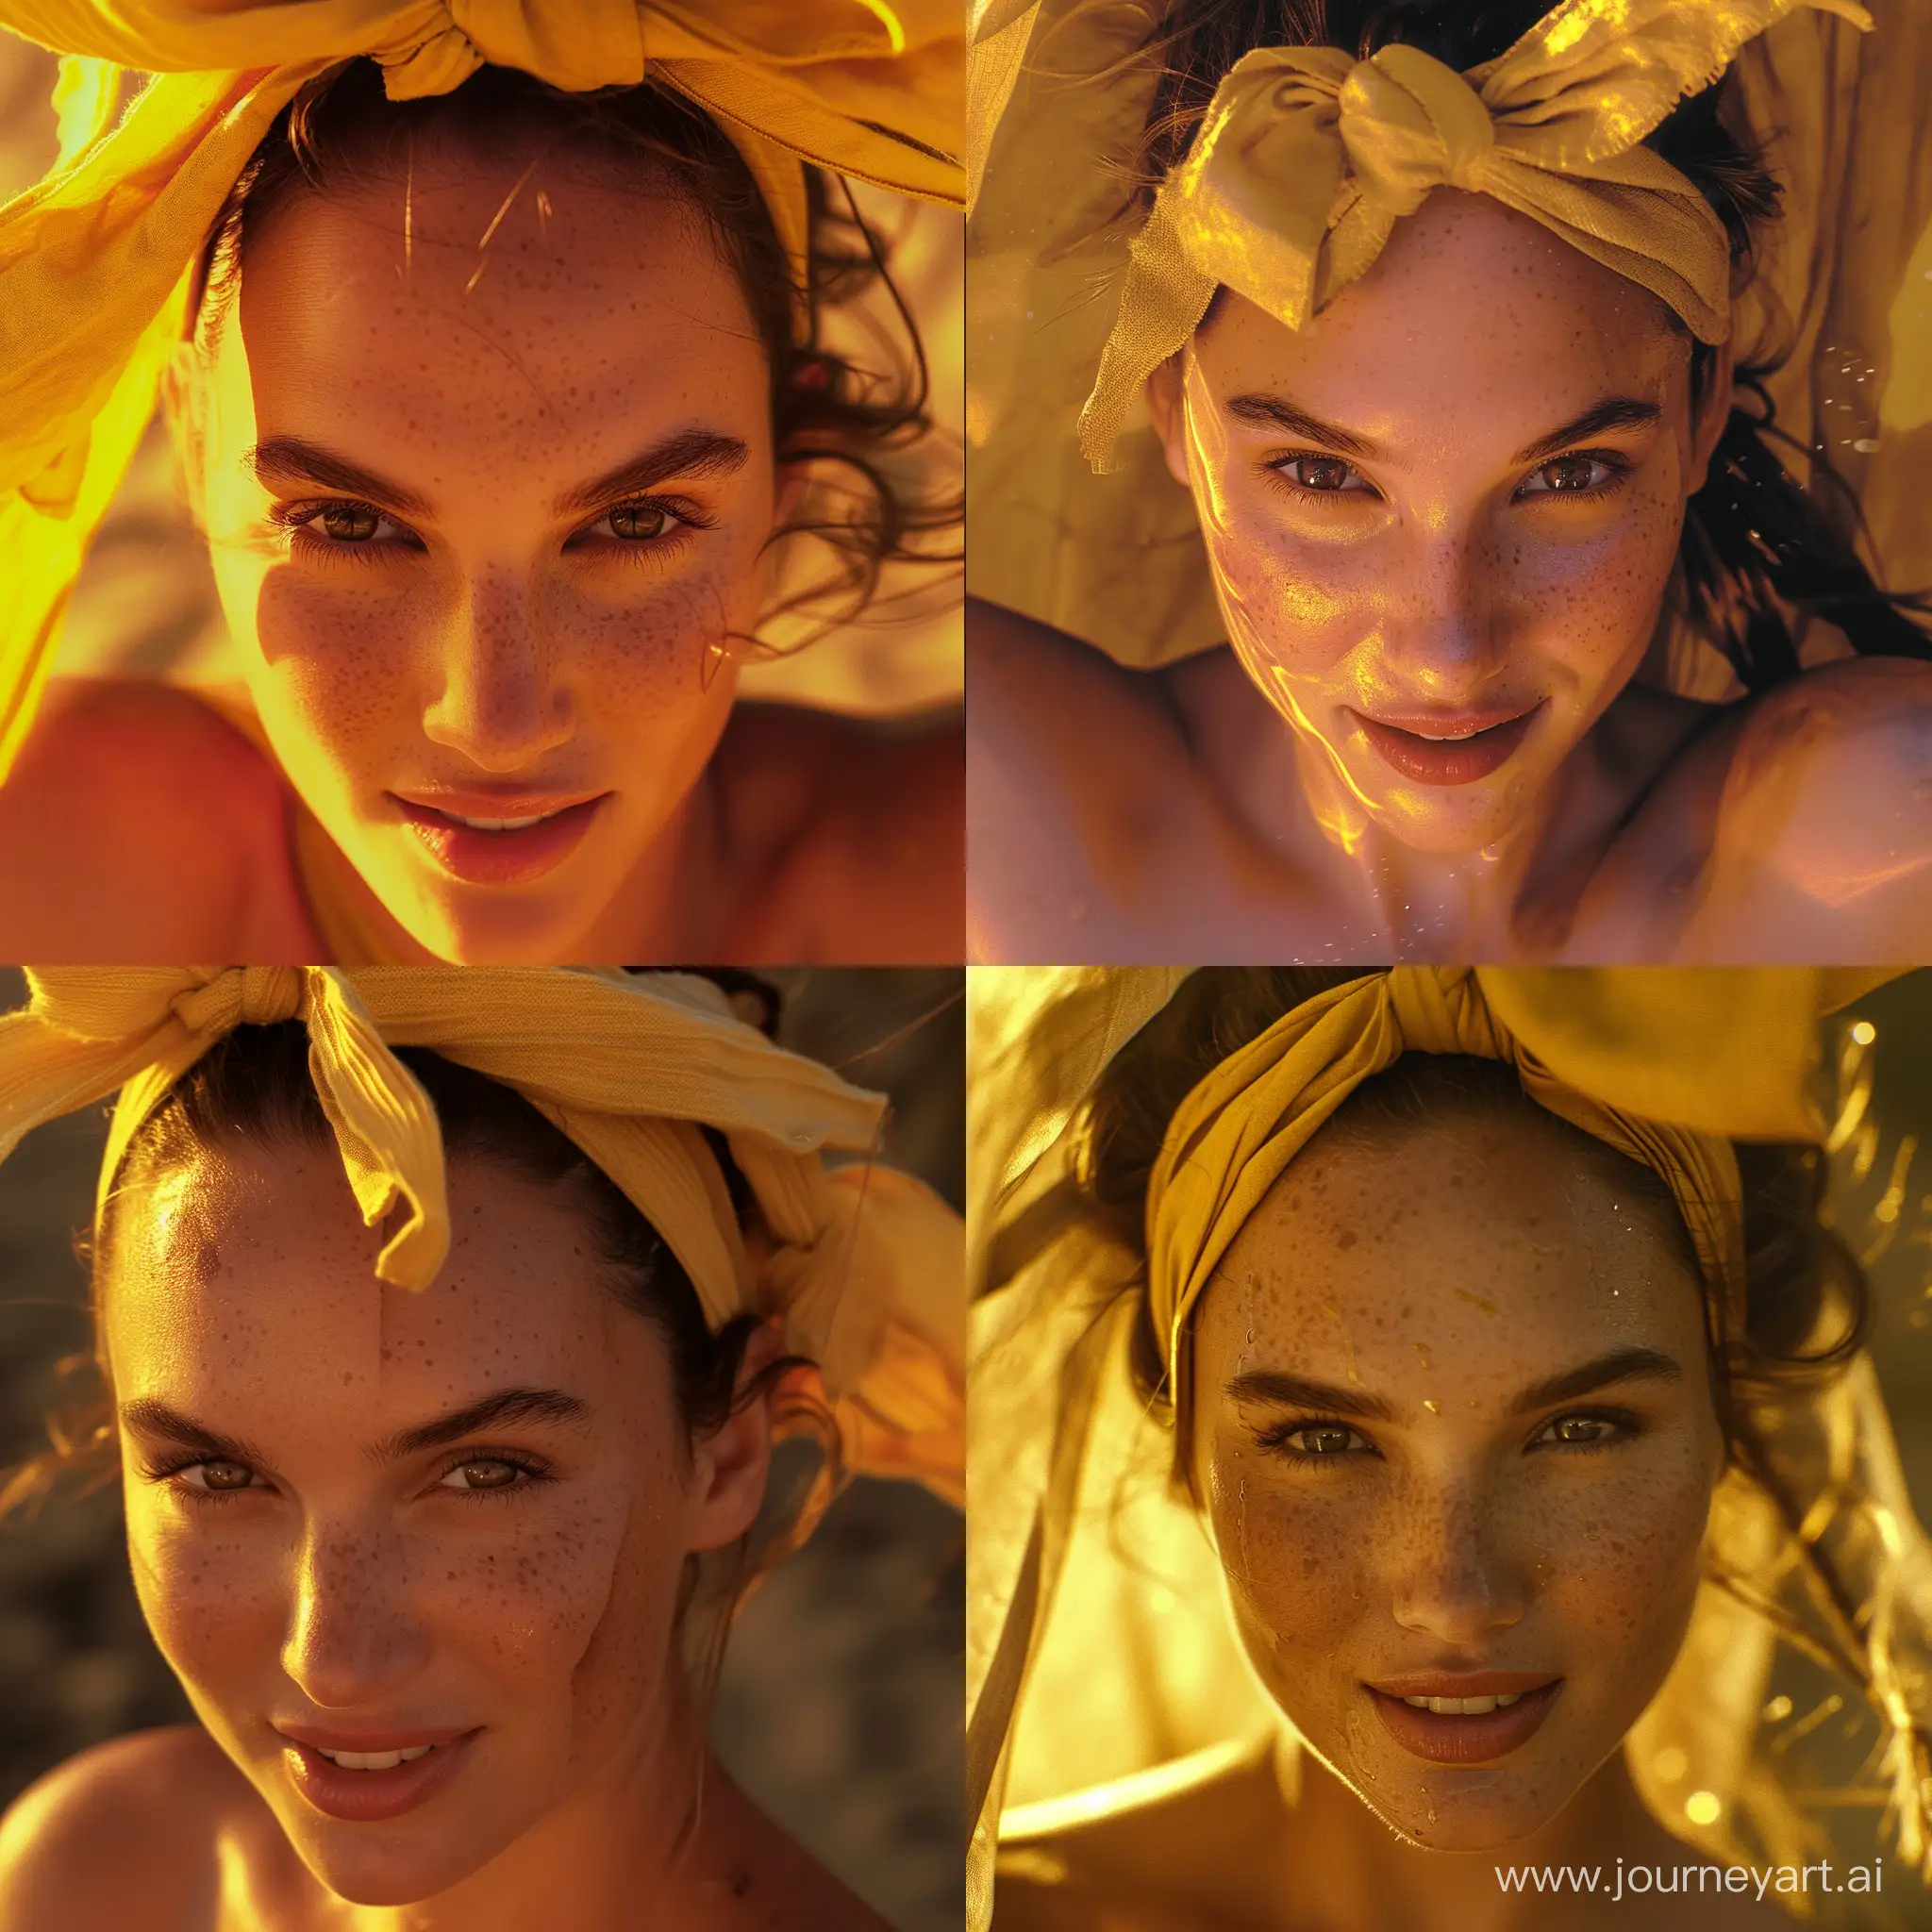 high-resolution, close-up image of gal gadot . The image is rich in detail and color, with a warm, golden-yellow tone dominating the composition.
. Her hair is tied up with a yellow headband that has a bow on the top. She has visible freckles across her face, which add to her cheerful expressiongenuine joy or amusement. 